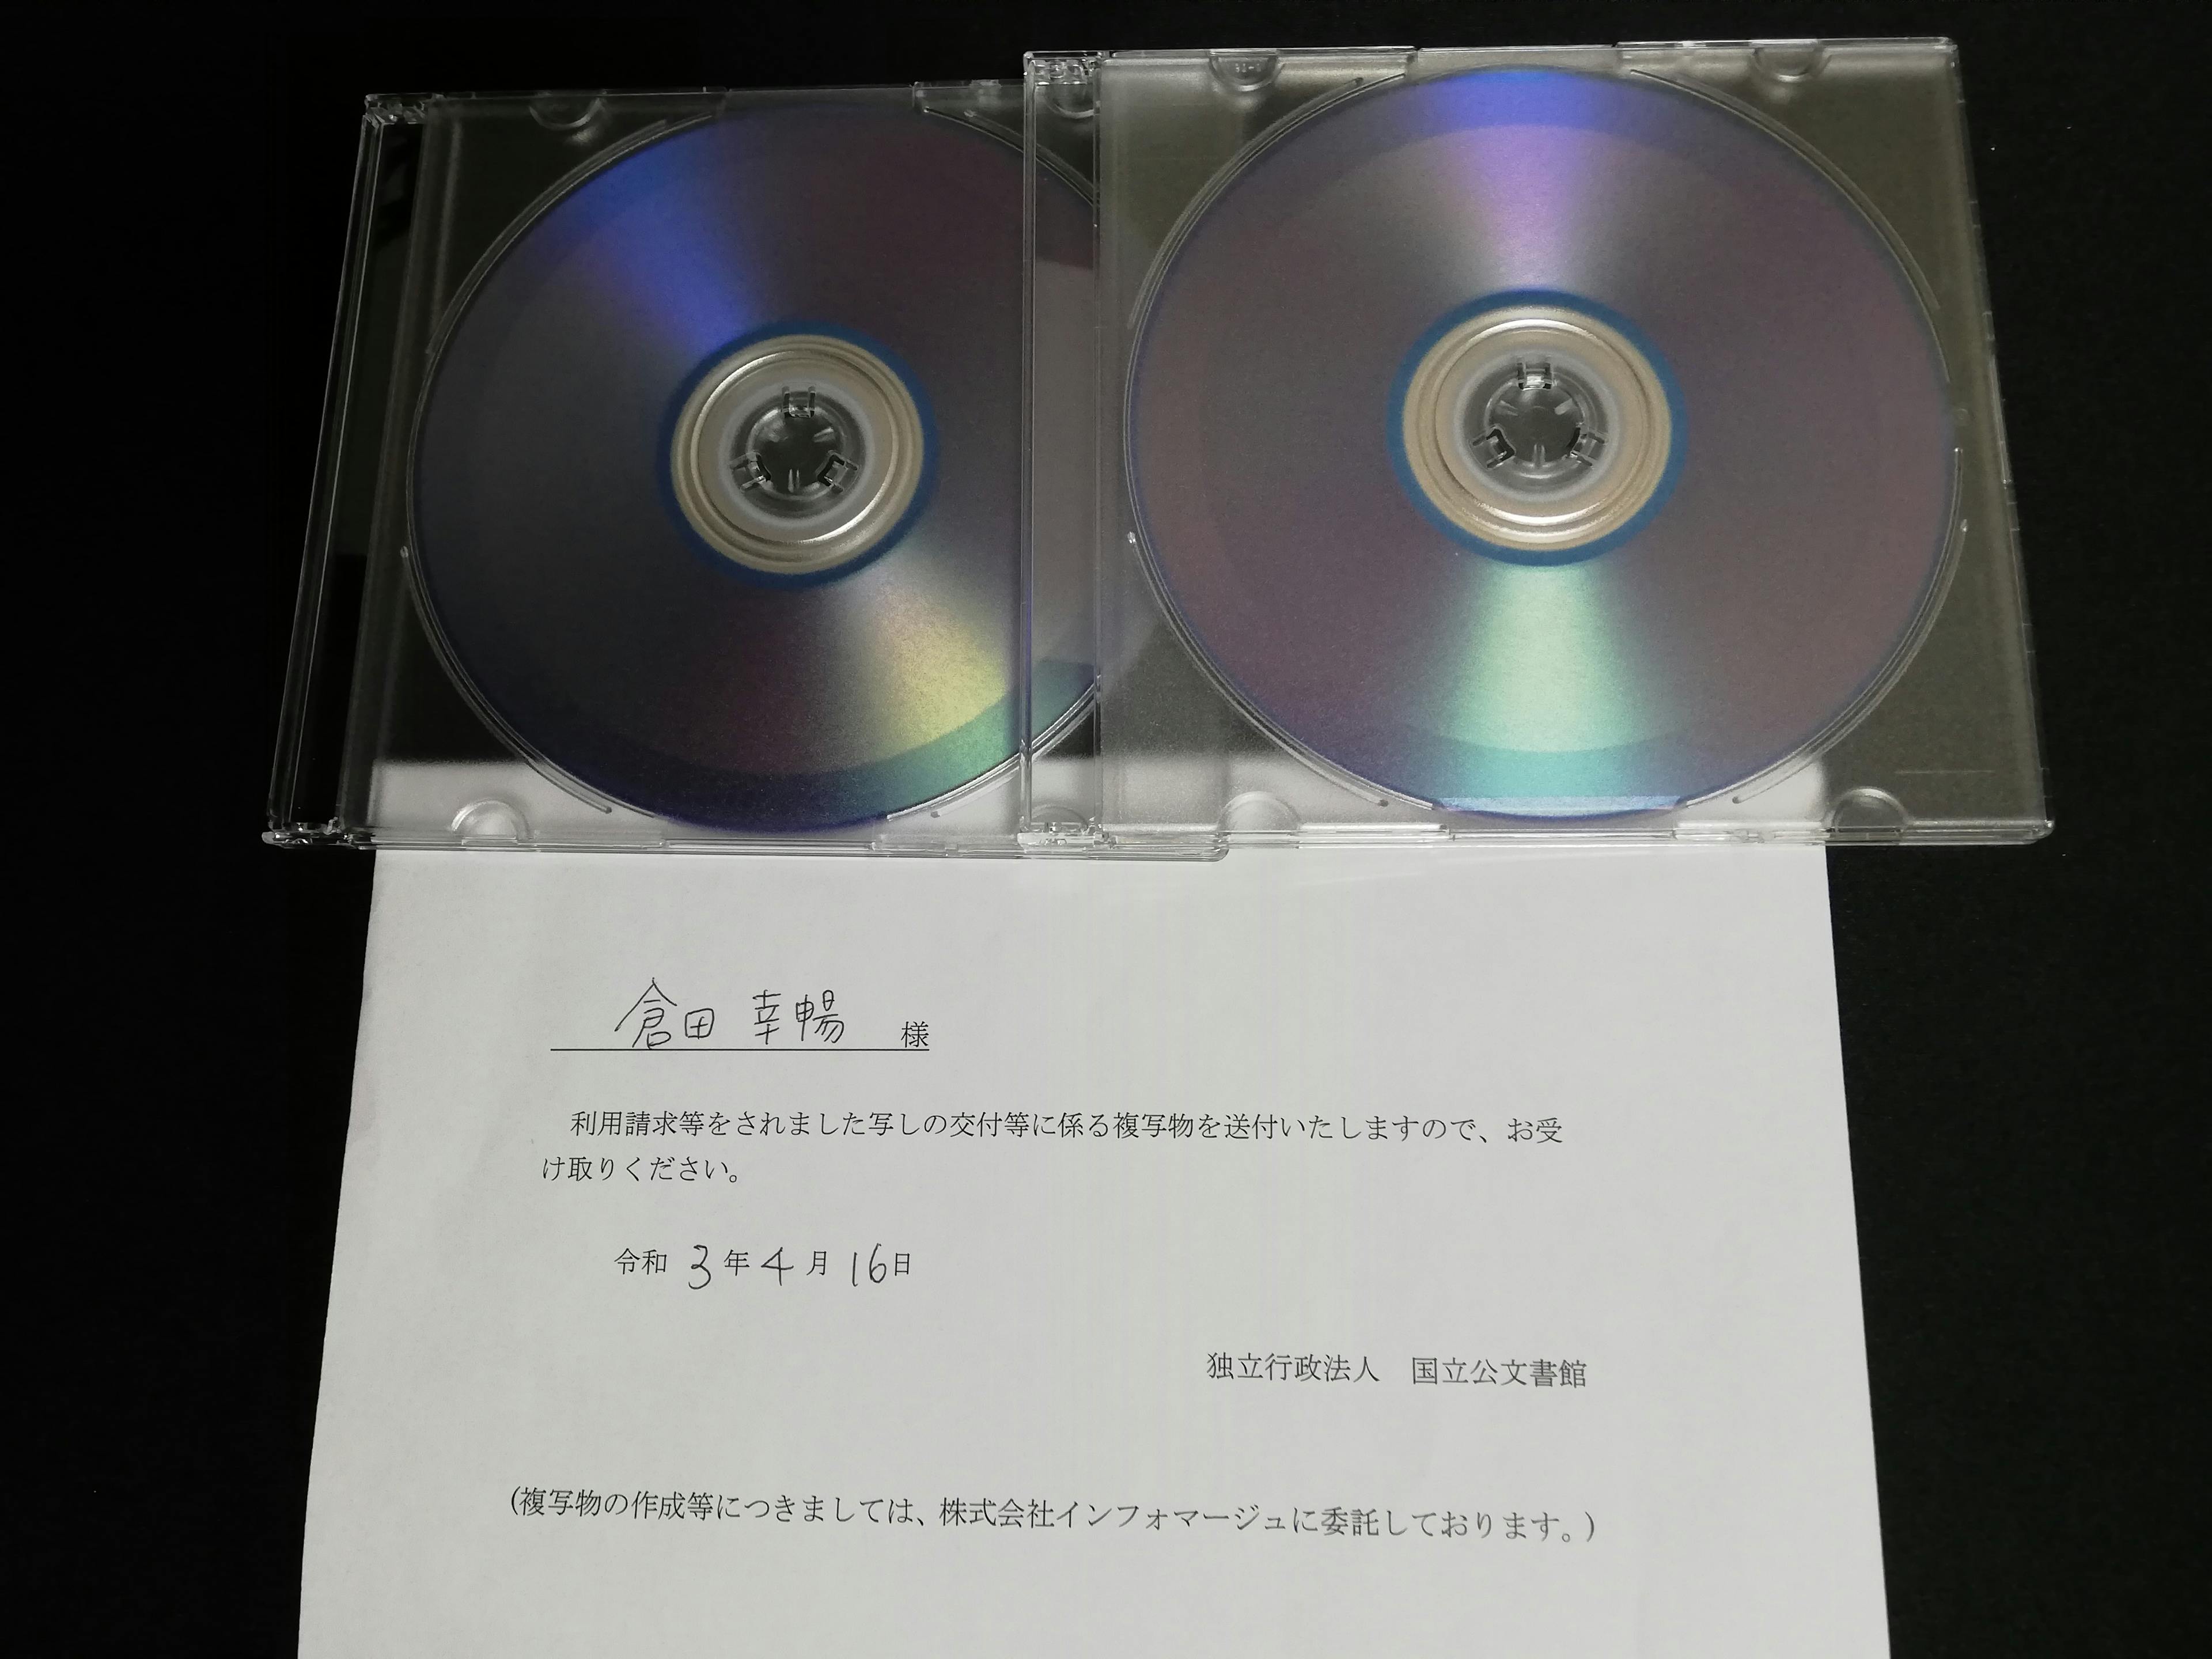 DVD-Rs containing the image files of Sanmon-Santō Sakamoto Sōezu (I requested the National Archives of Japan to make a special copying.)